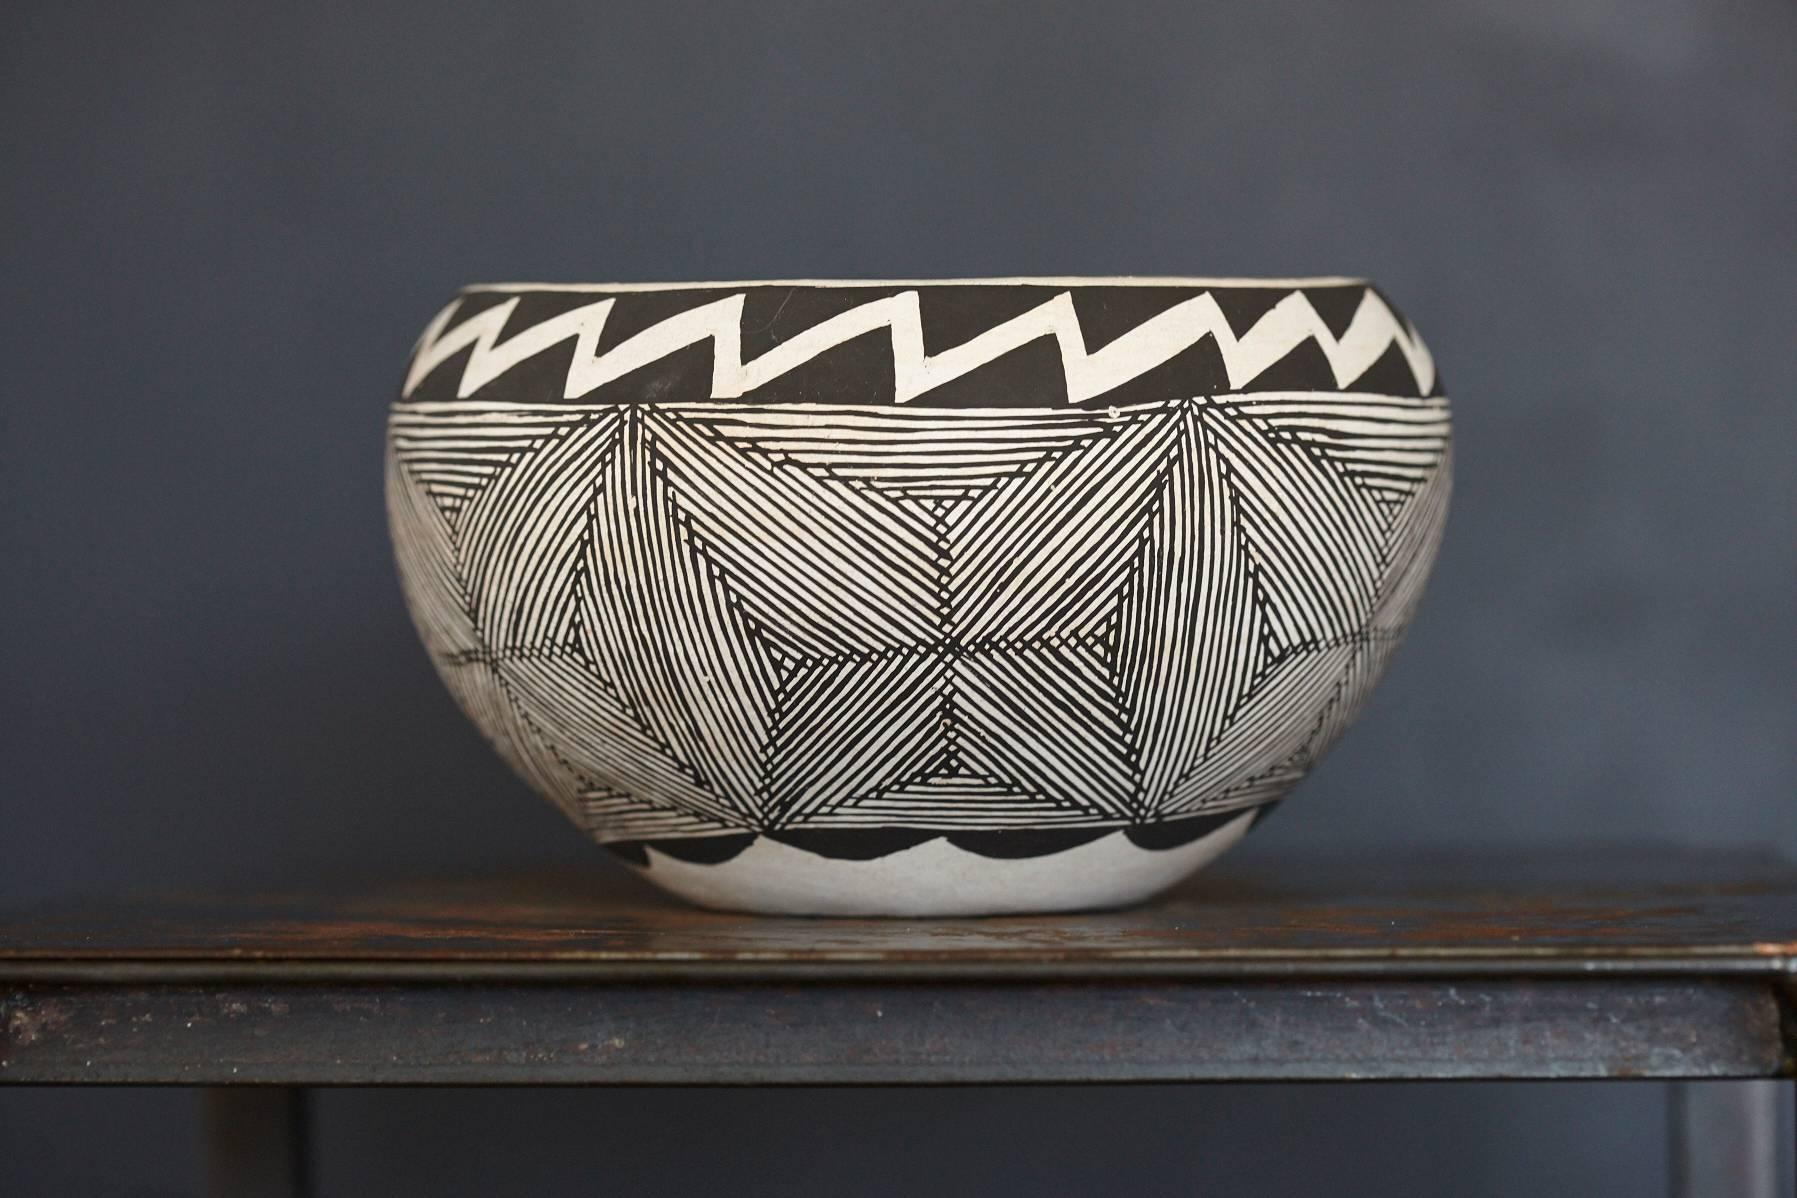 Eye-catching aroma earthenware bowl with hand-painted black and white graphic design pattern, 1970s.
The bowl is in excellent condition, no chips, fleabites, cracks or repairs.